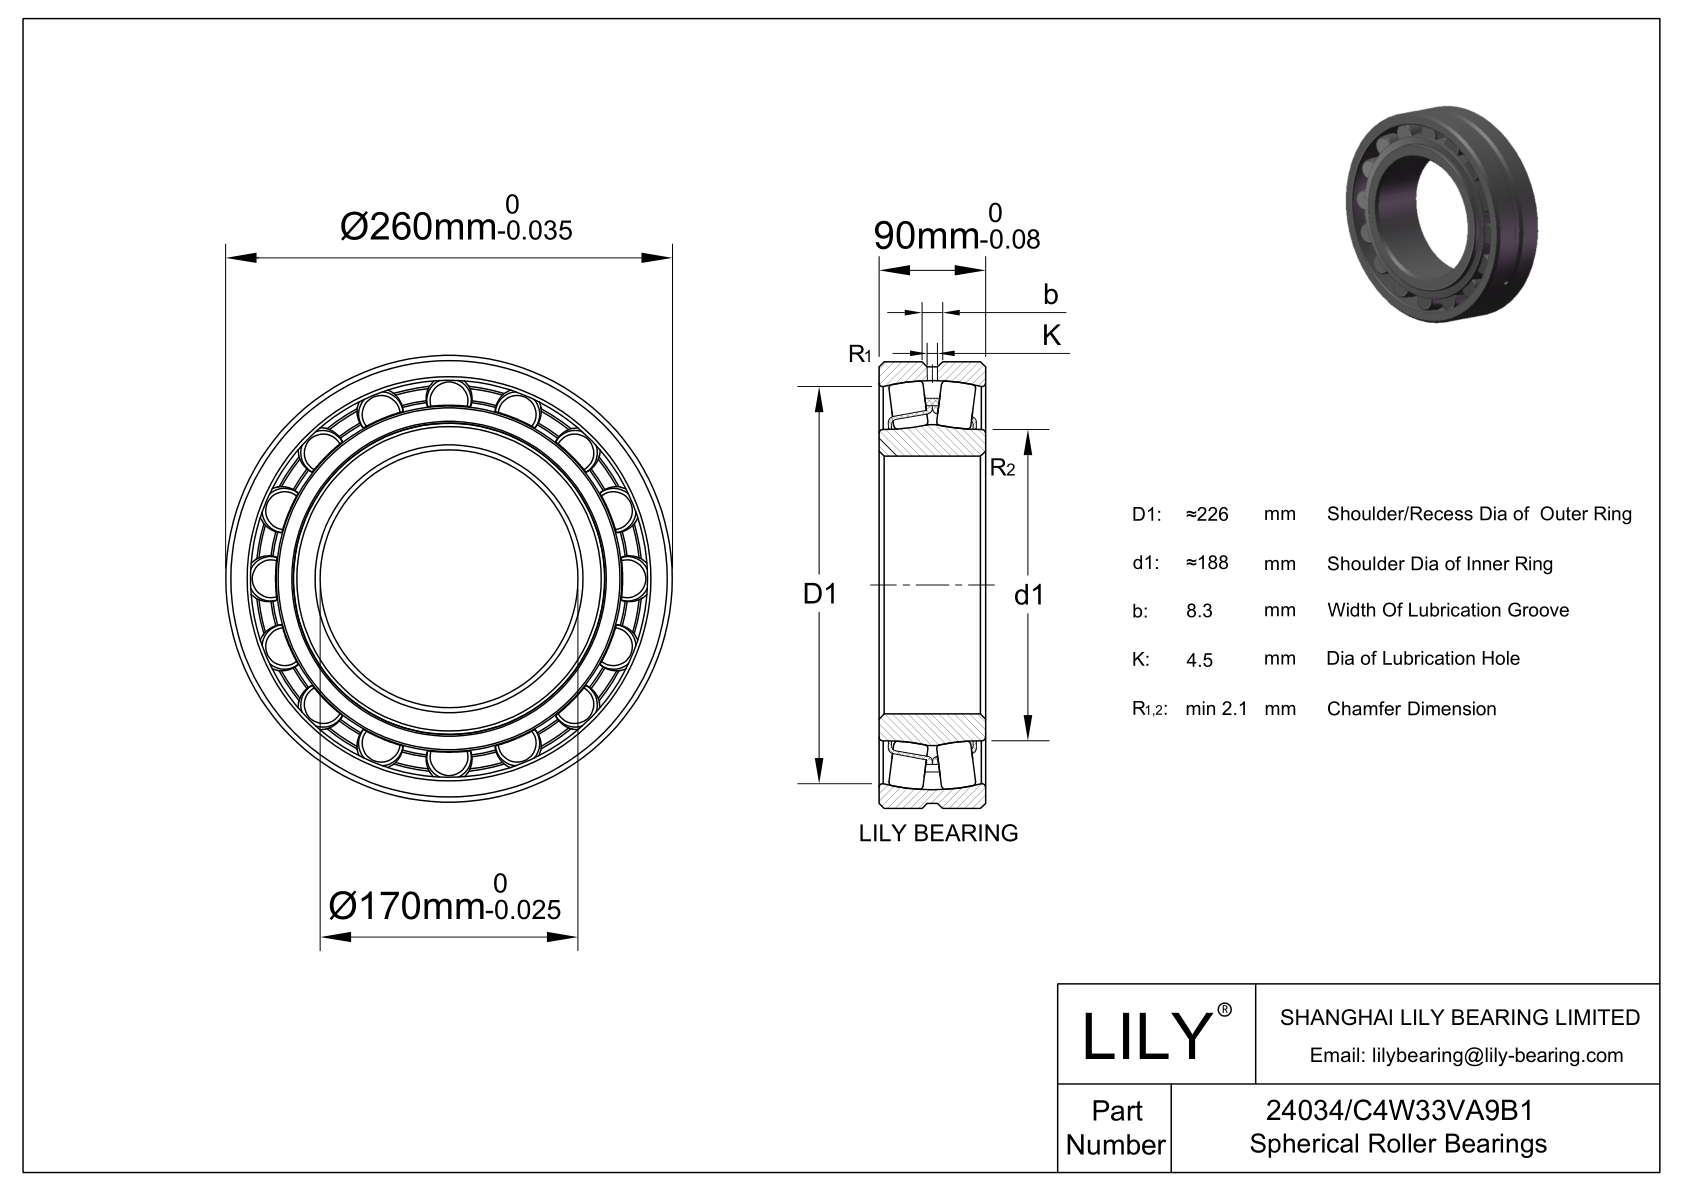 24034/C4W33VA9B1 Double Row Spherical Roller Bearing cad drawing